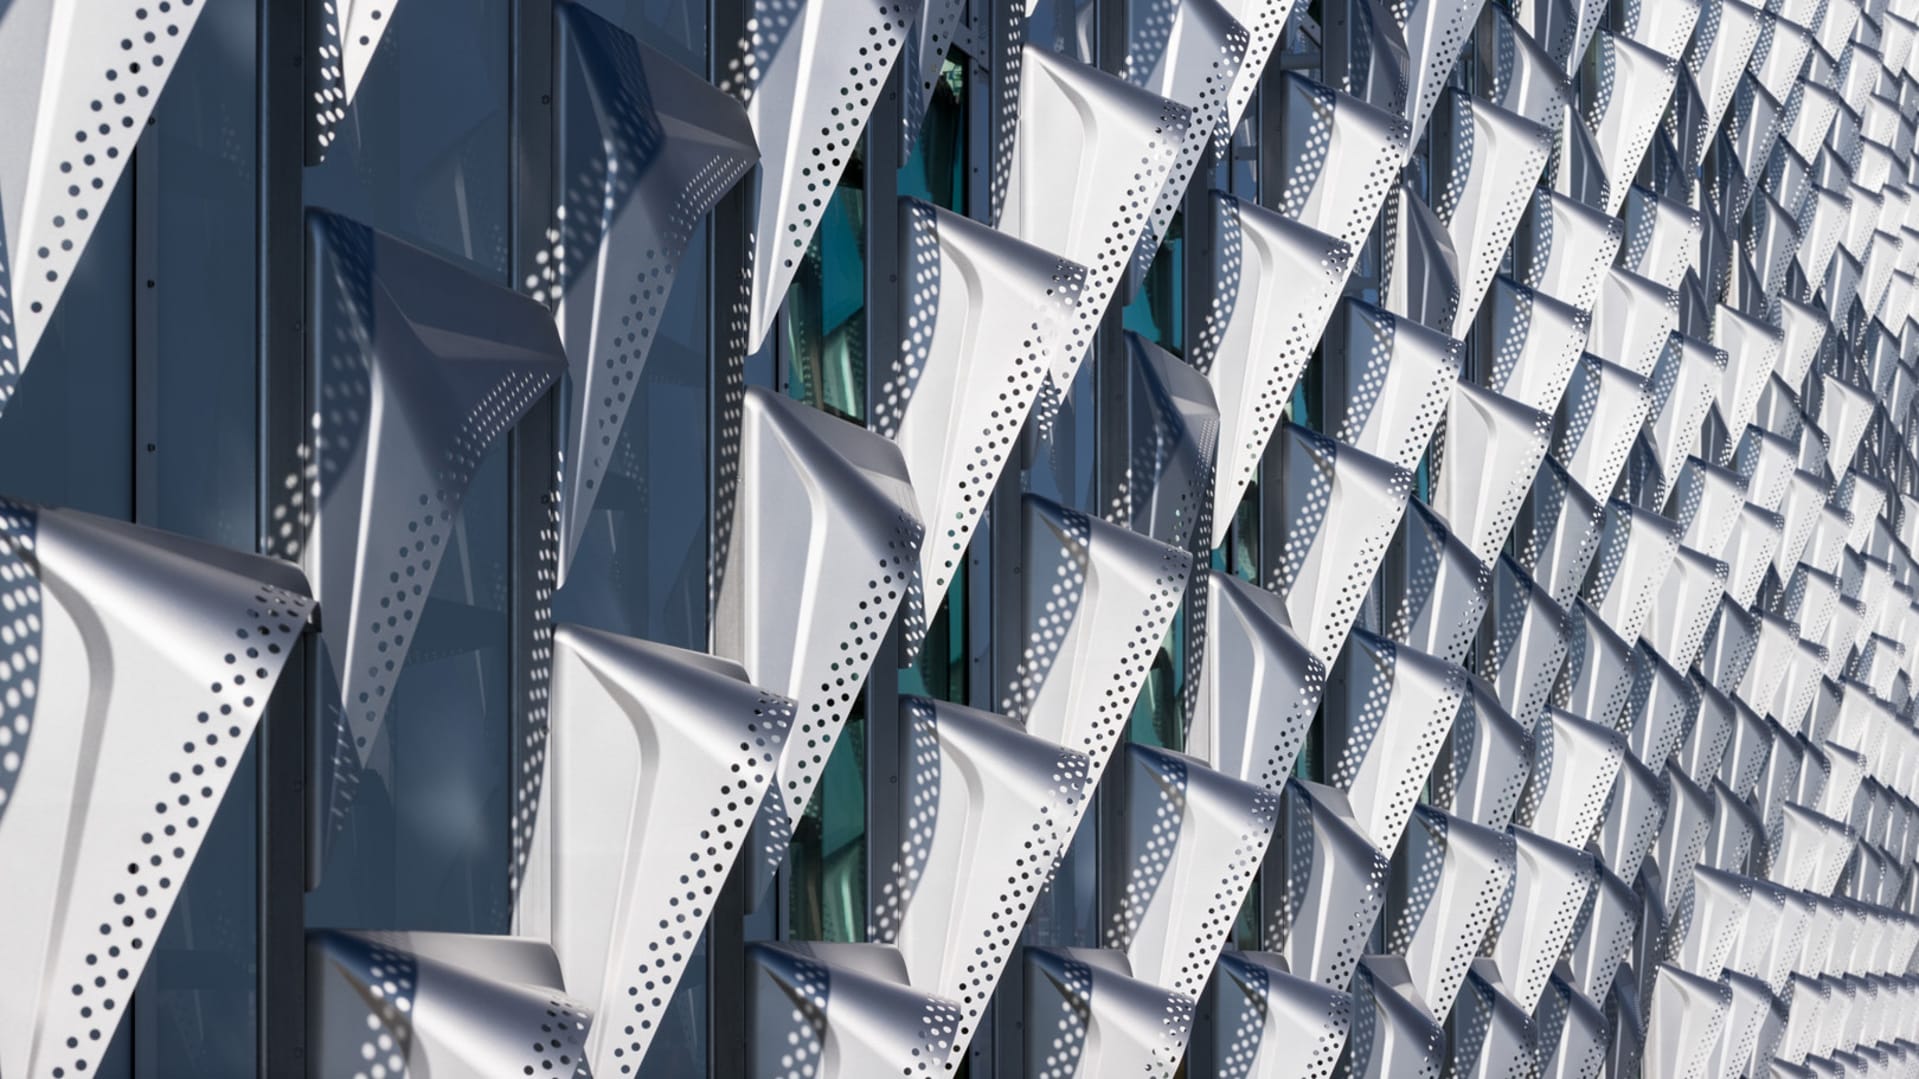 It looks like a cheese grater, but this new Harvard building has environmental superpowers